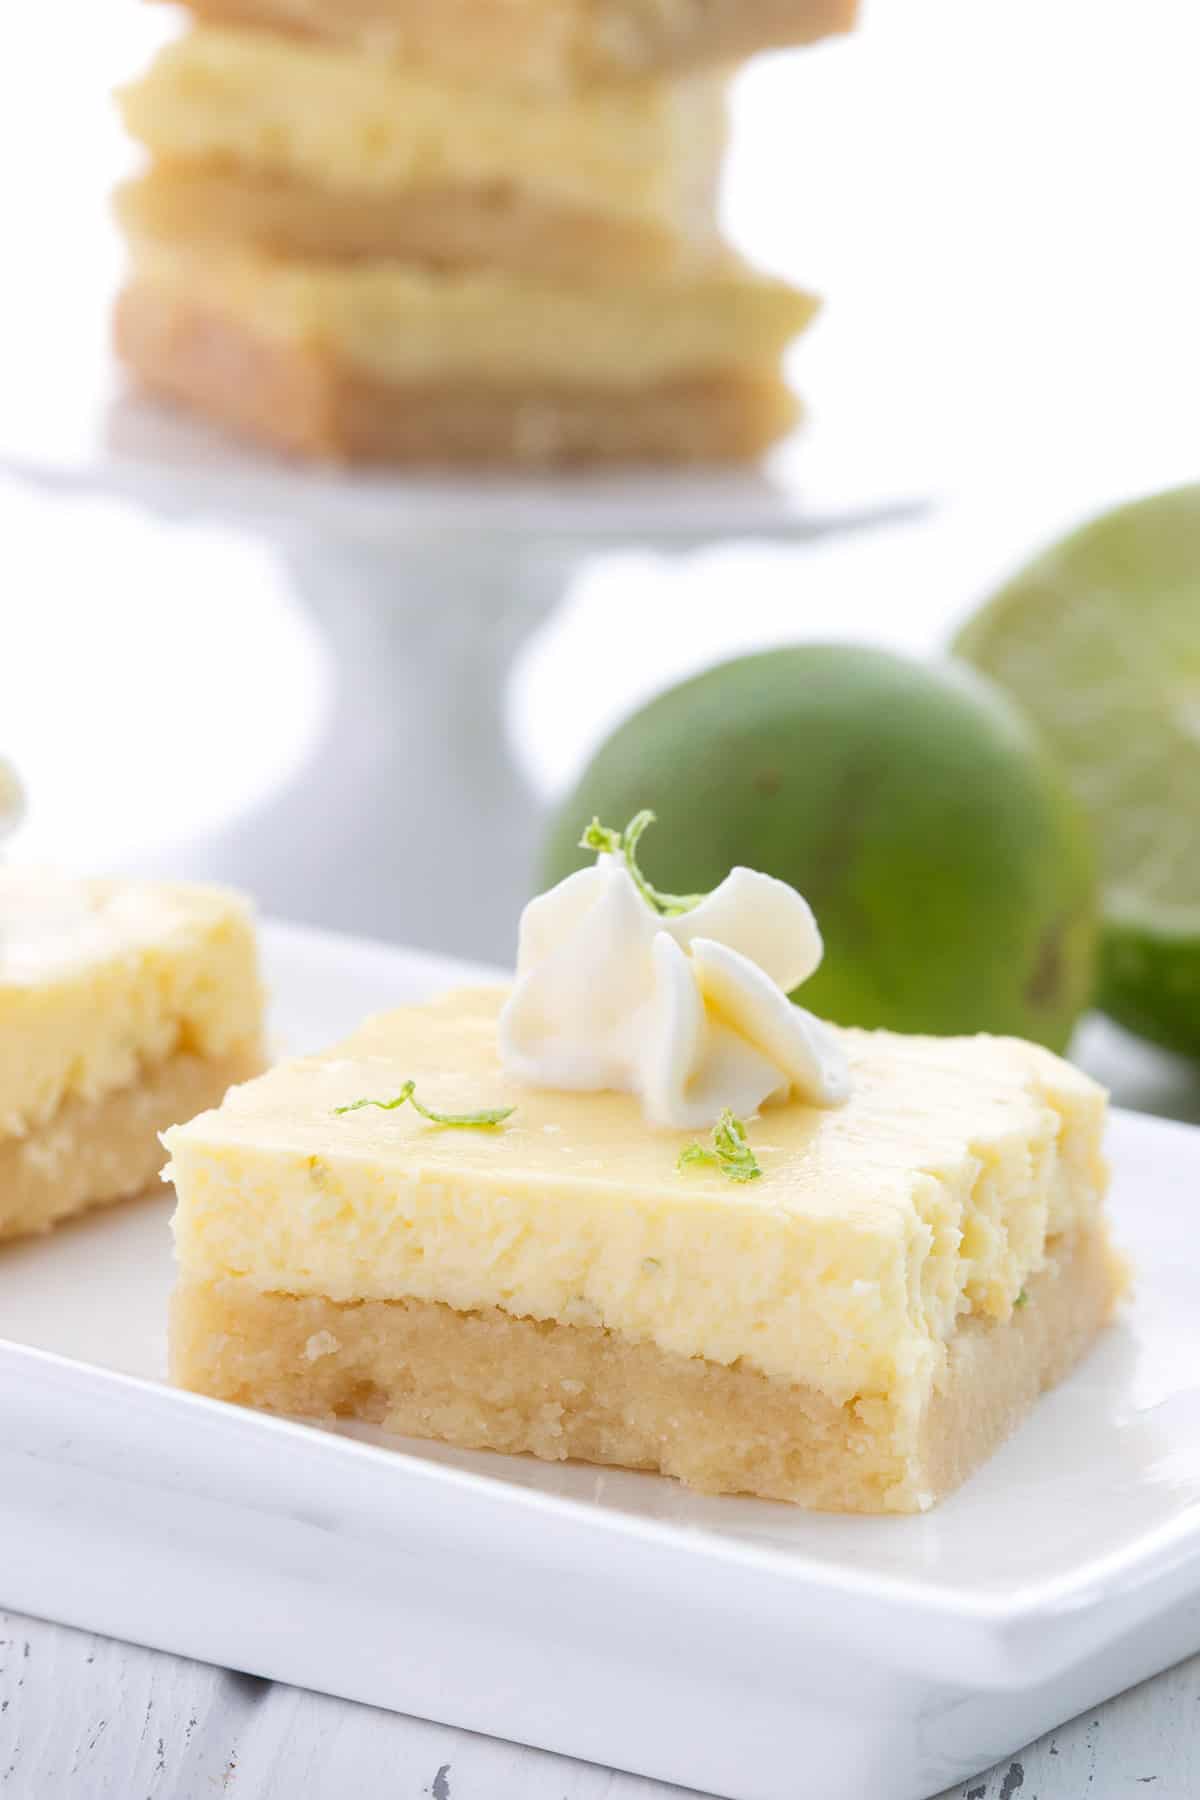 A low carb key lime bar on a white tray in front of limes and more bars.